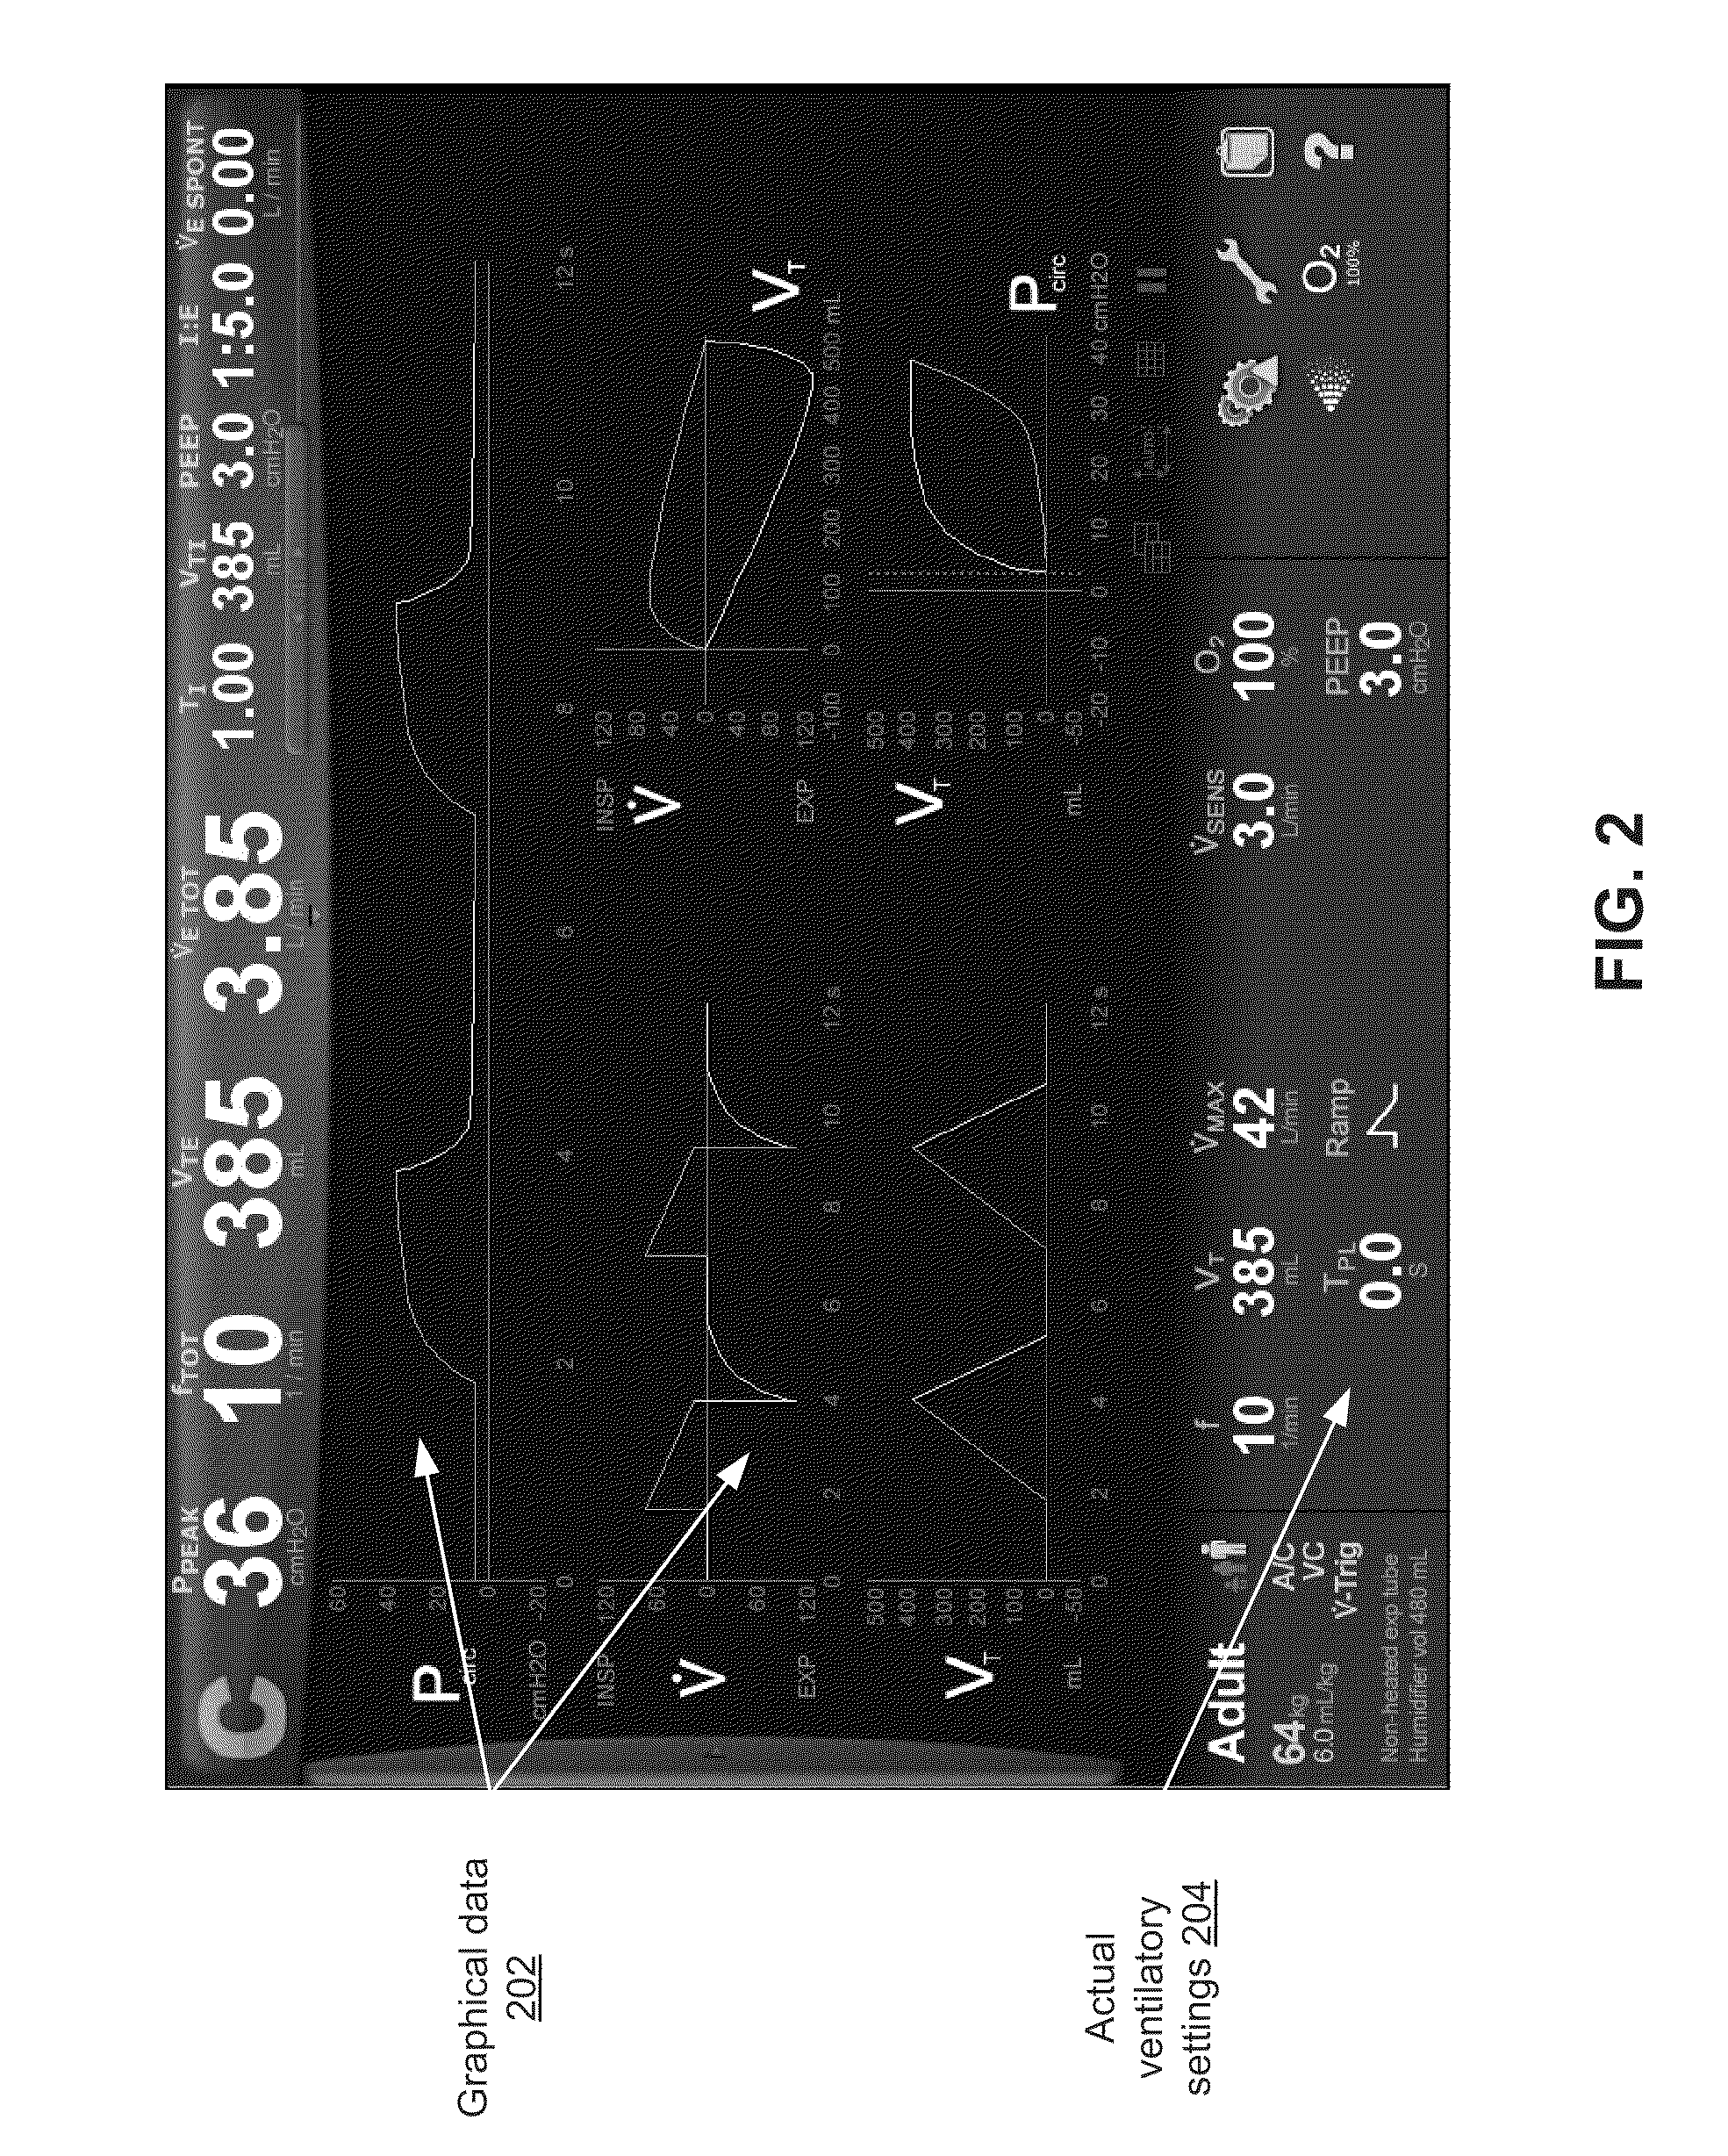 Display And Access To Settings On A Ventilator Graphical User Interface